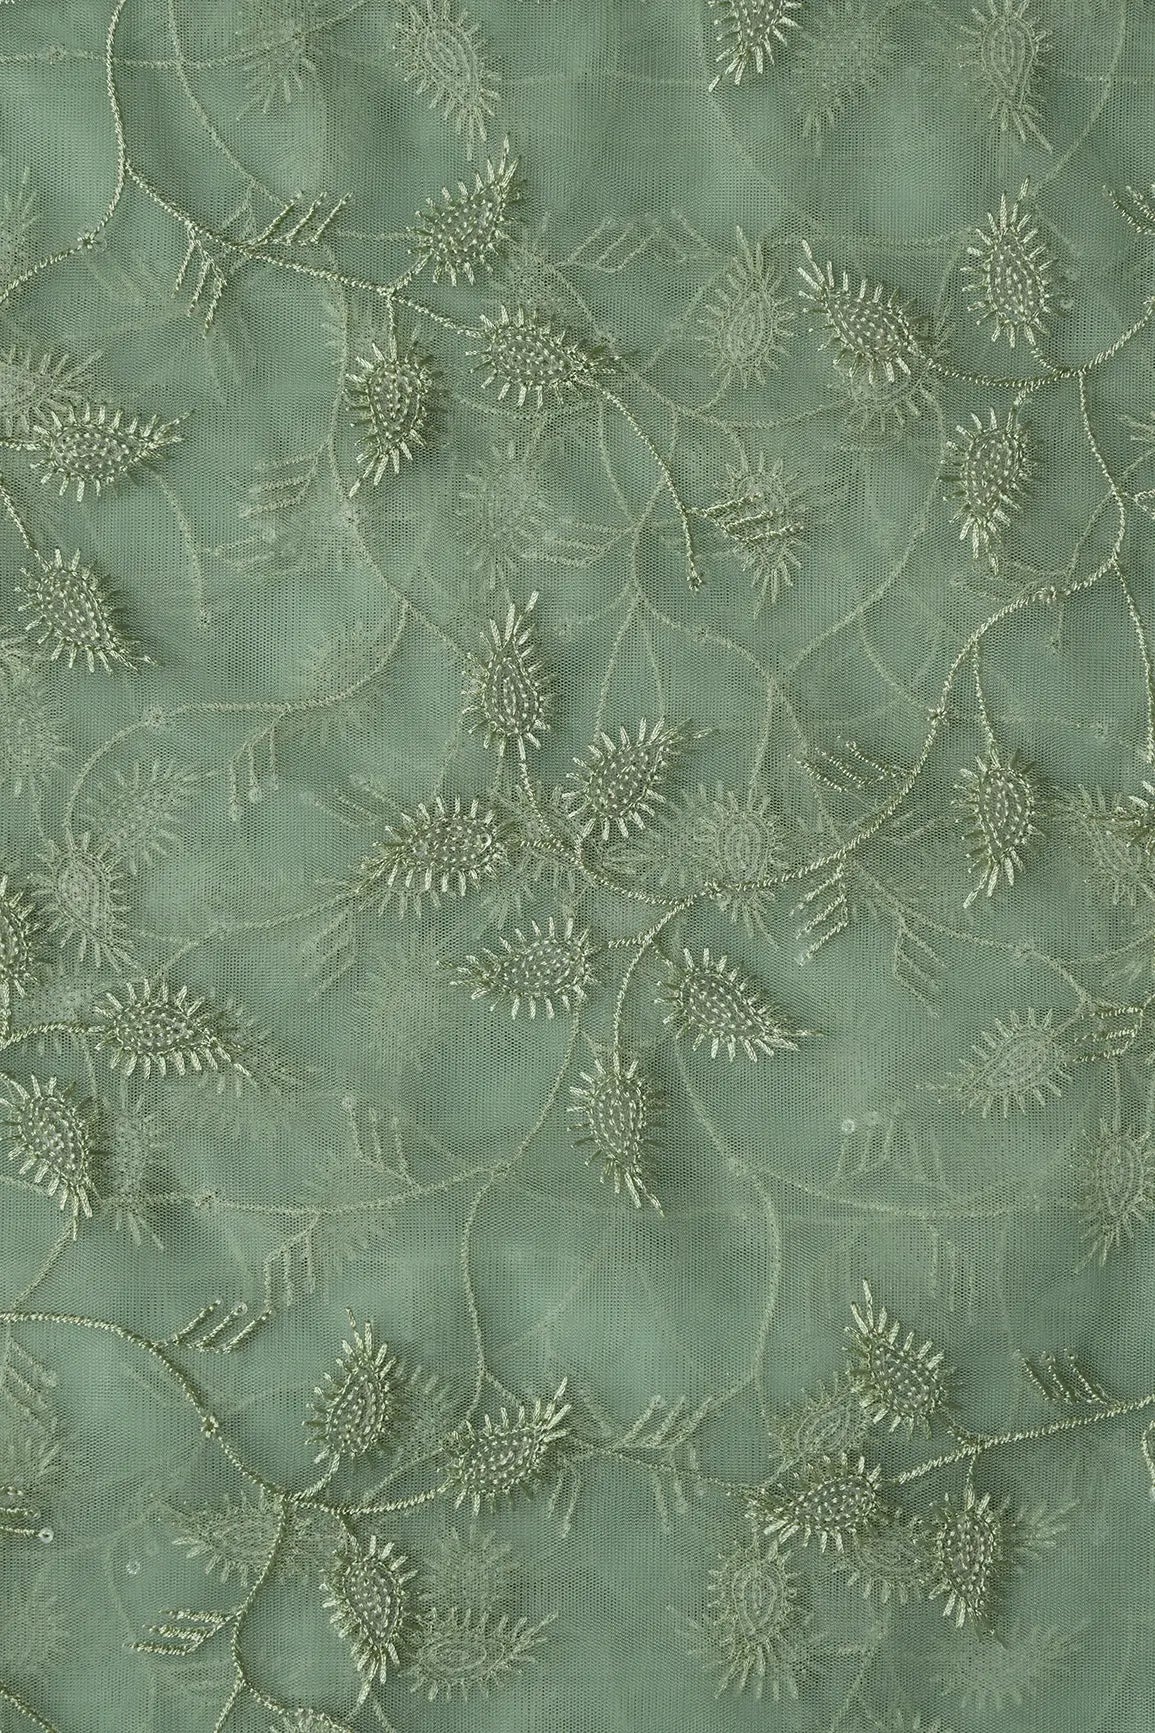 Olive Thread With Water Sequins Leafy Embroidery On Olive Soft Net Fabric - doeraa